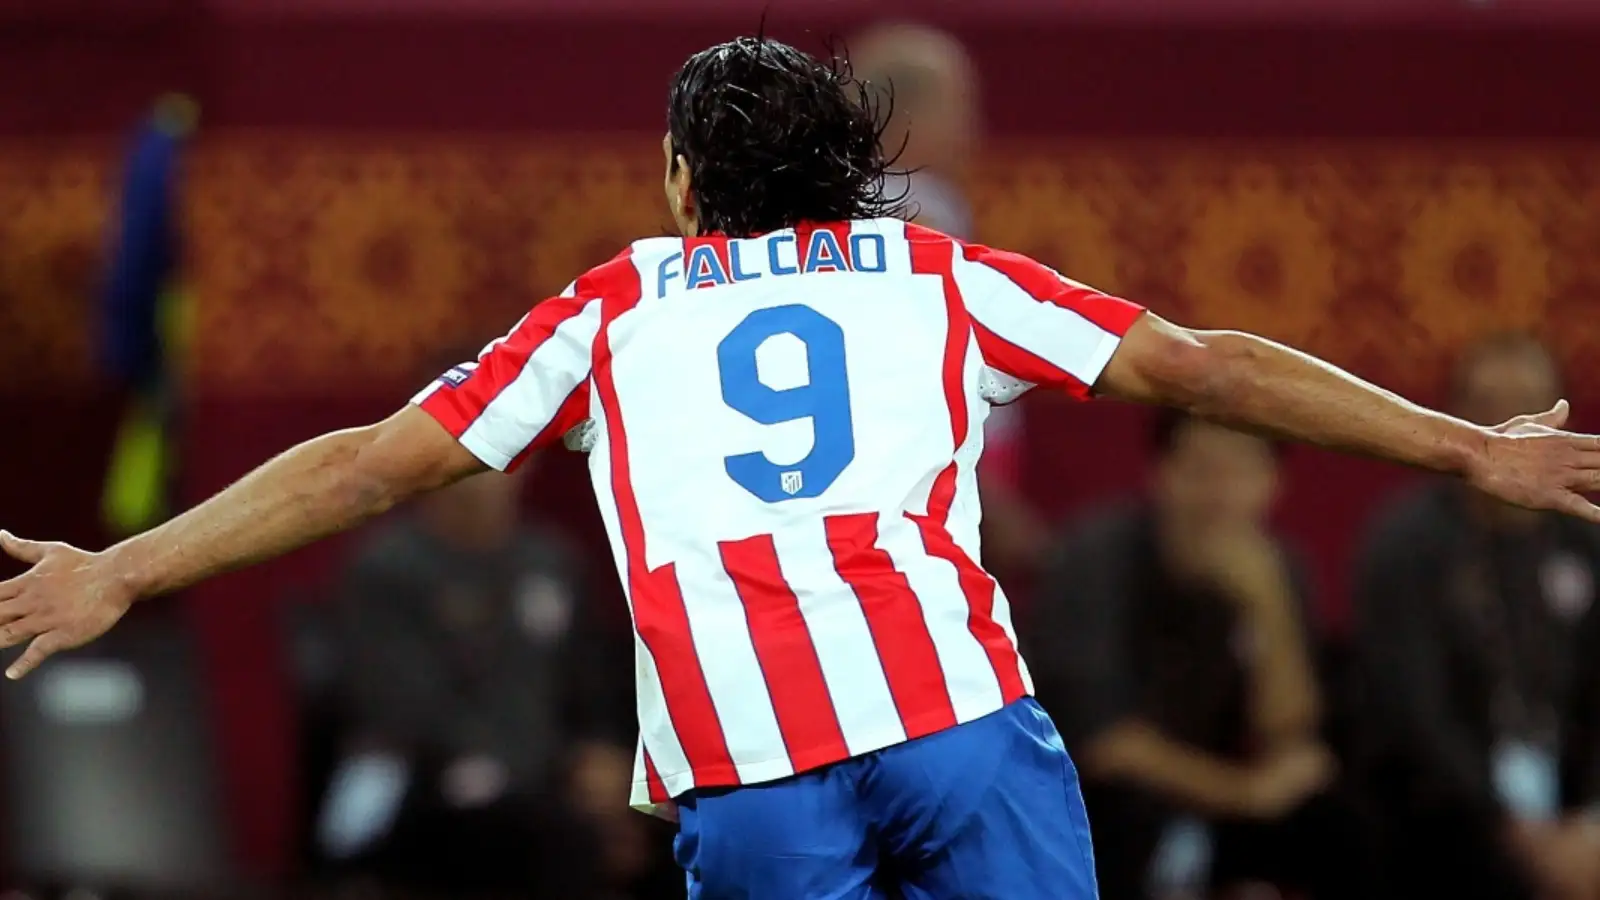 Remembering when Radamel Falcao tore Chelsea apart in the Super Cup